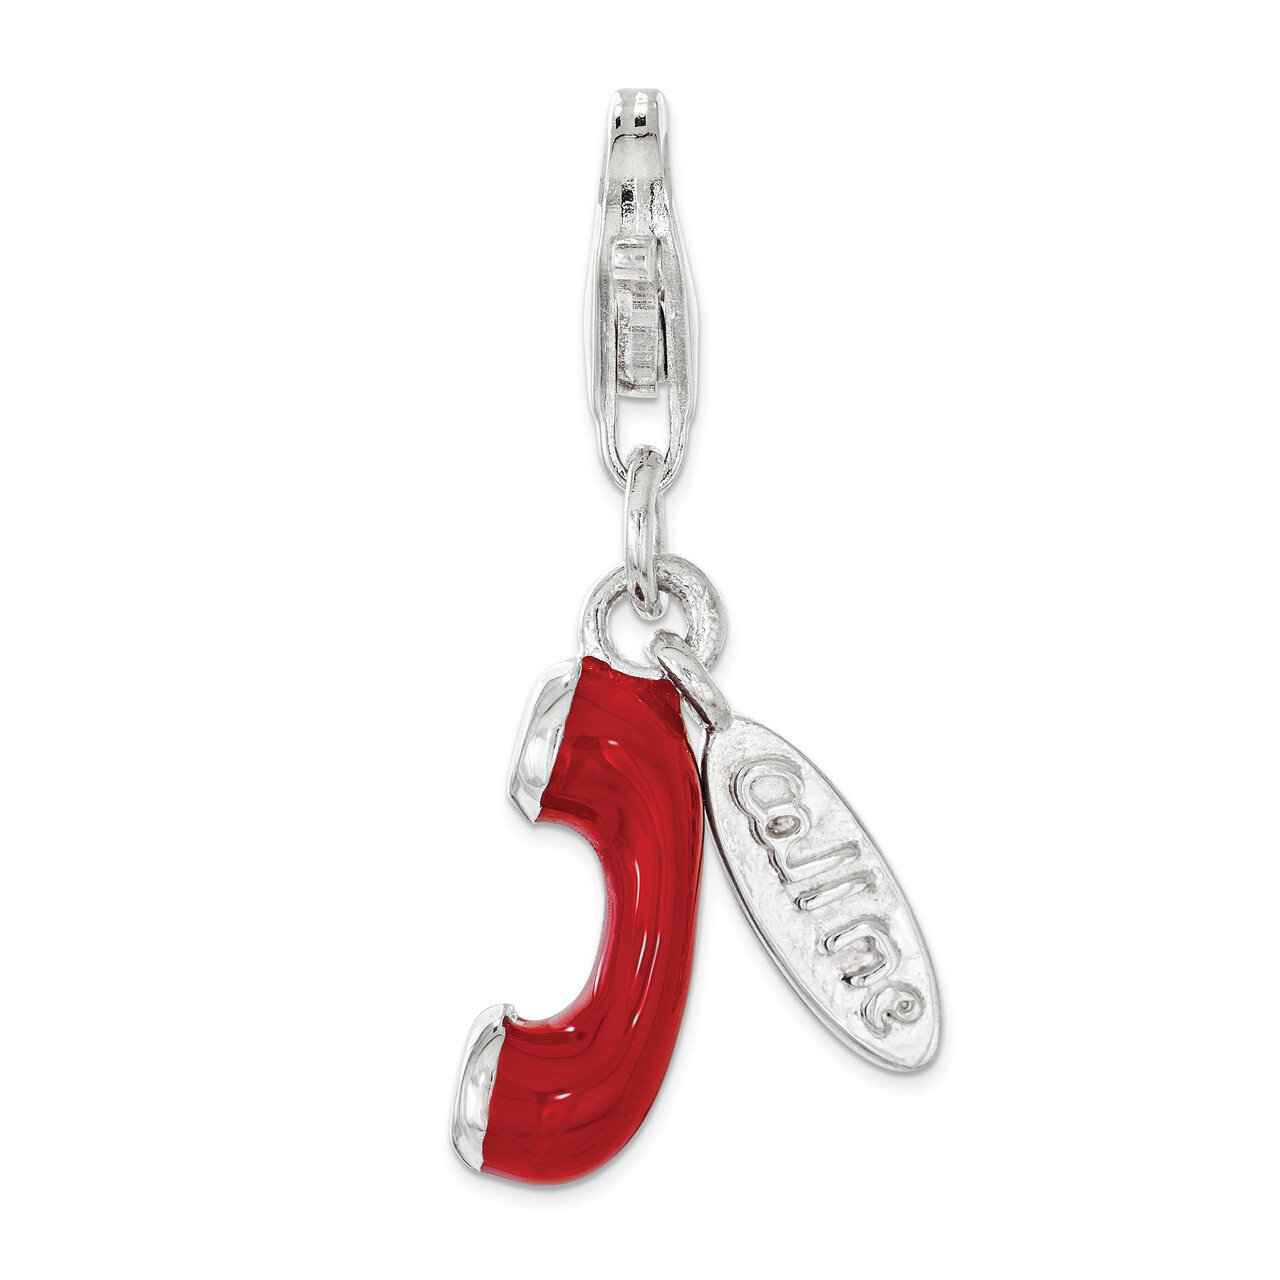 CALL ME 3D Phone Charm - Sterling Silver Enameled QCC1217